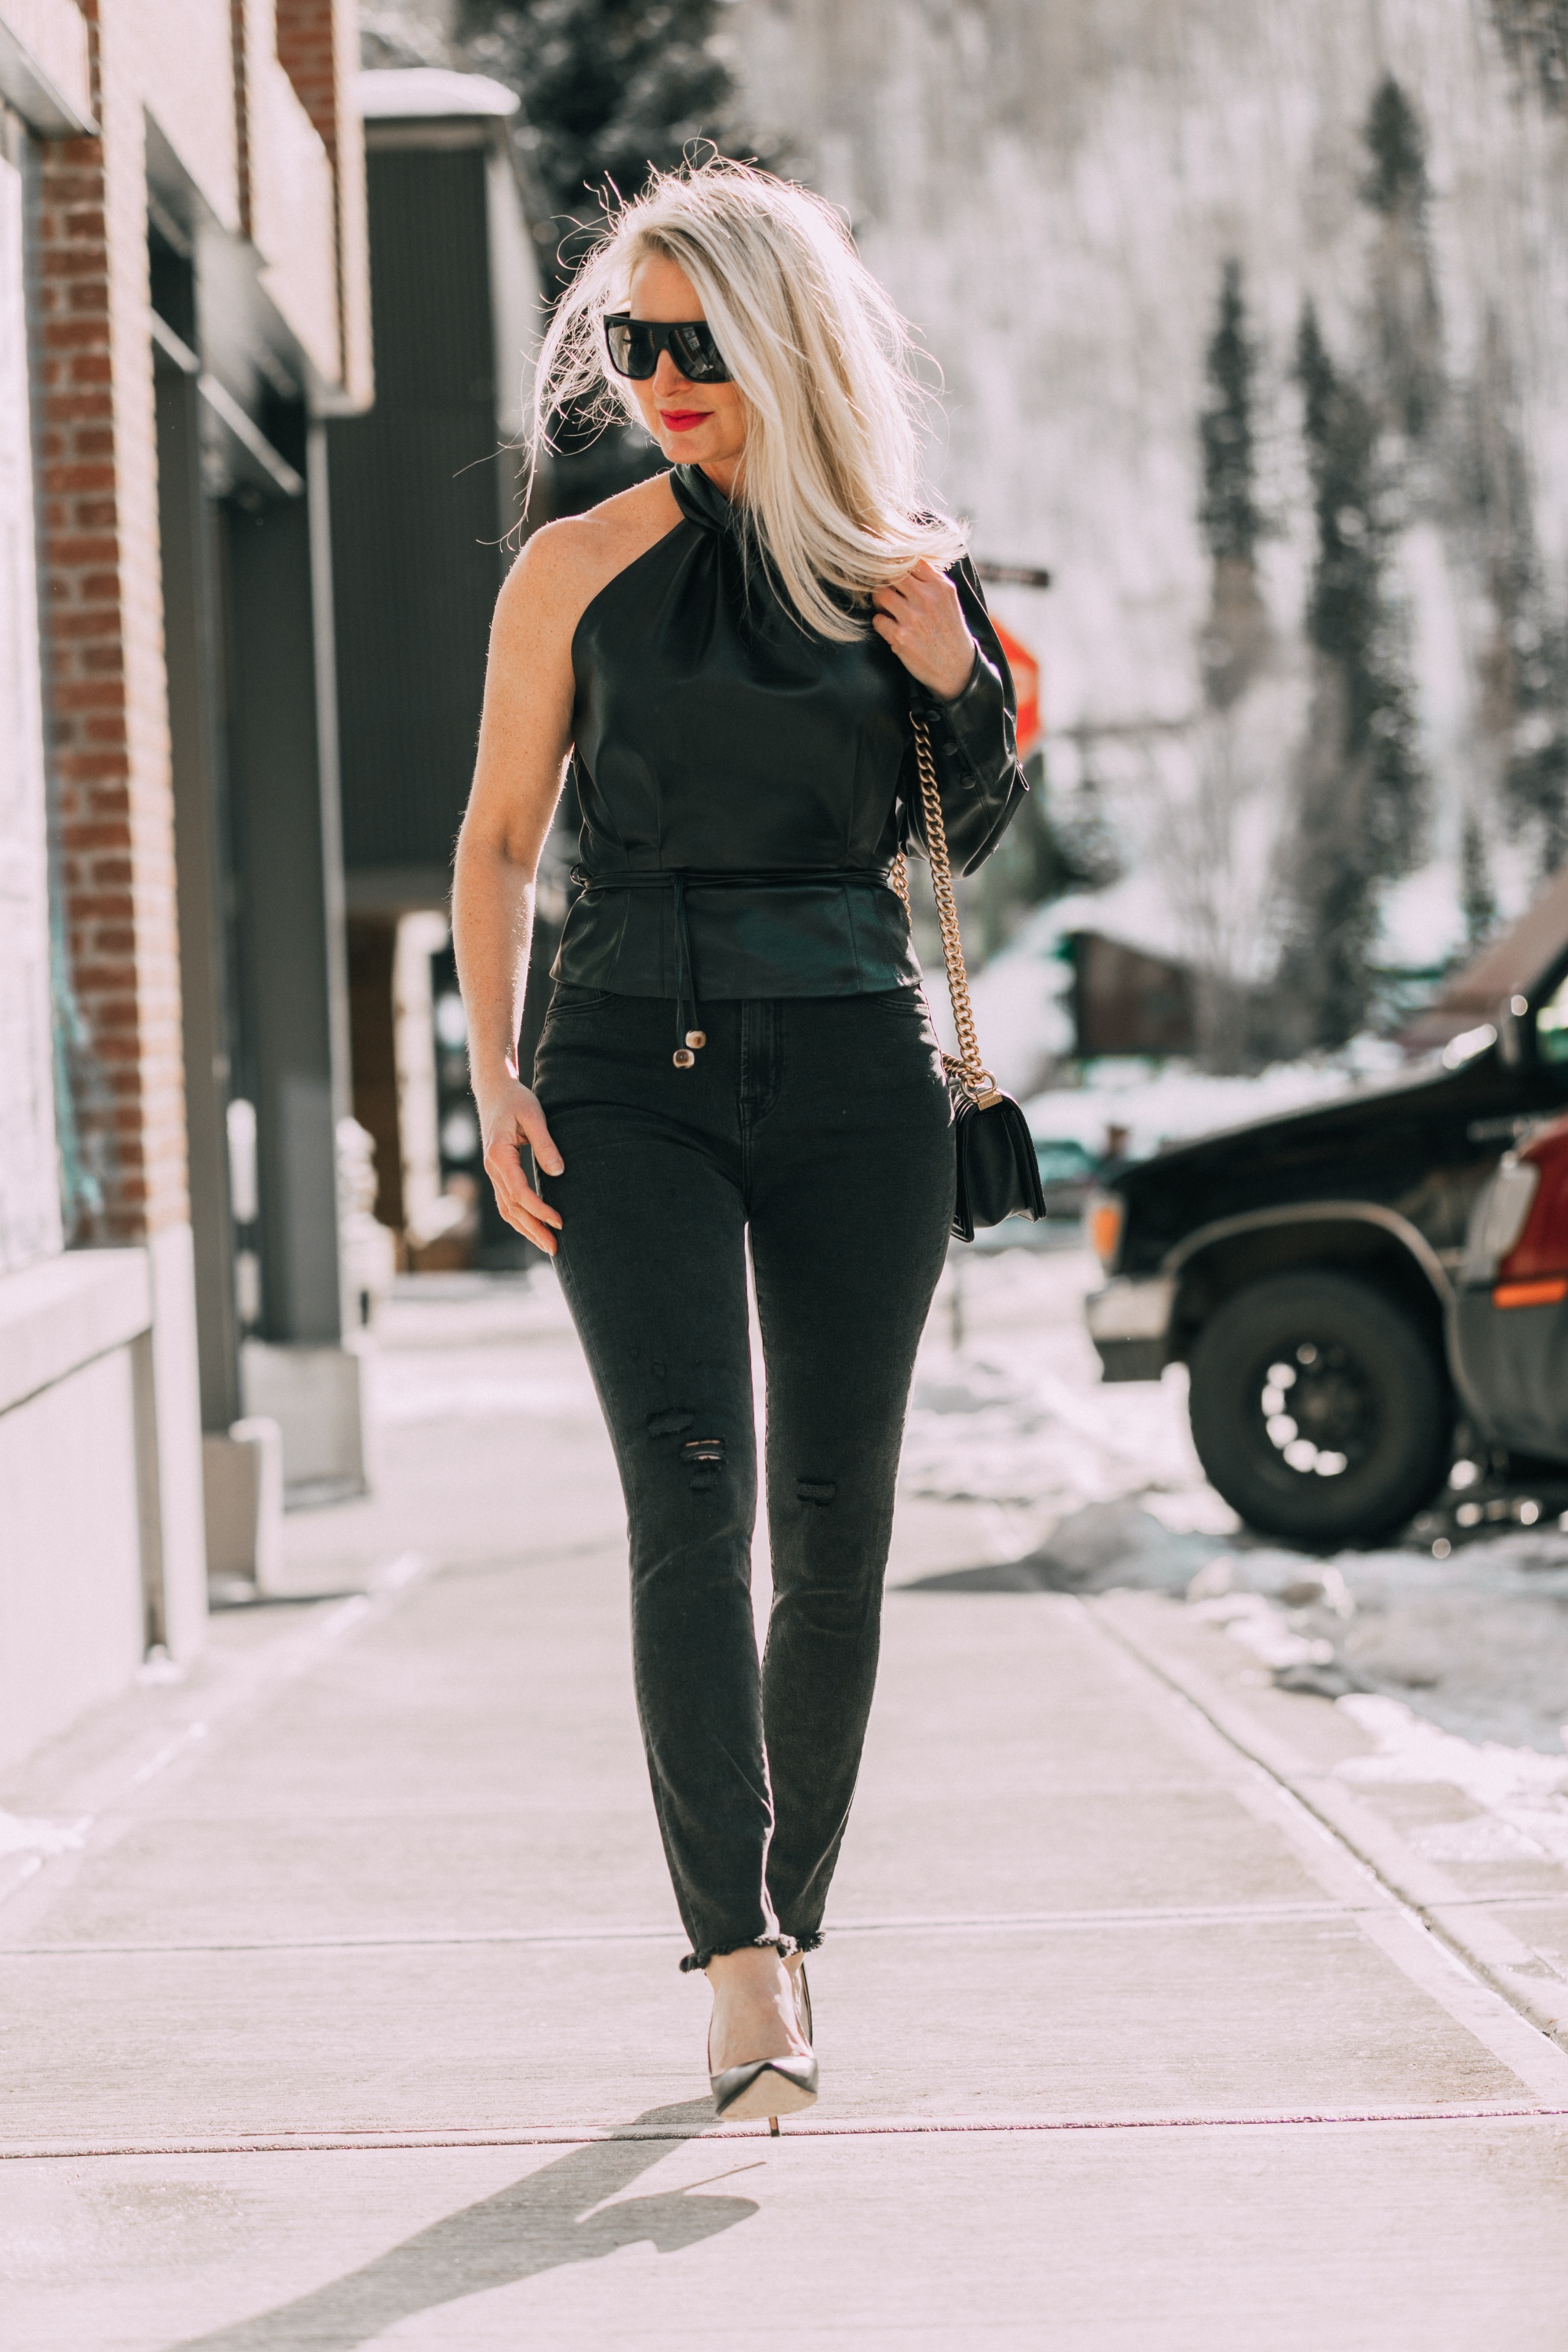 Date Night Outfits, Fashion blogger Erin Busbee of BusbeeStyle.com wearing black minimally distressed jeans, Jimmy Choo pumps, and faux leather one shoulder top by Nanushka in Telluride, Colorado, dating over 40